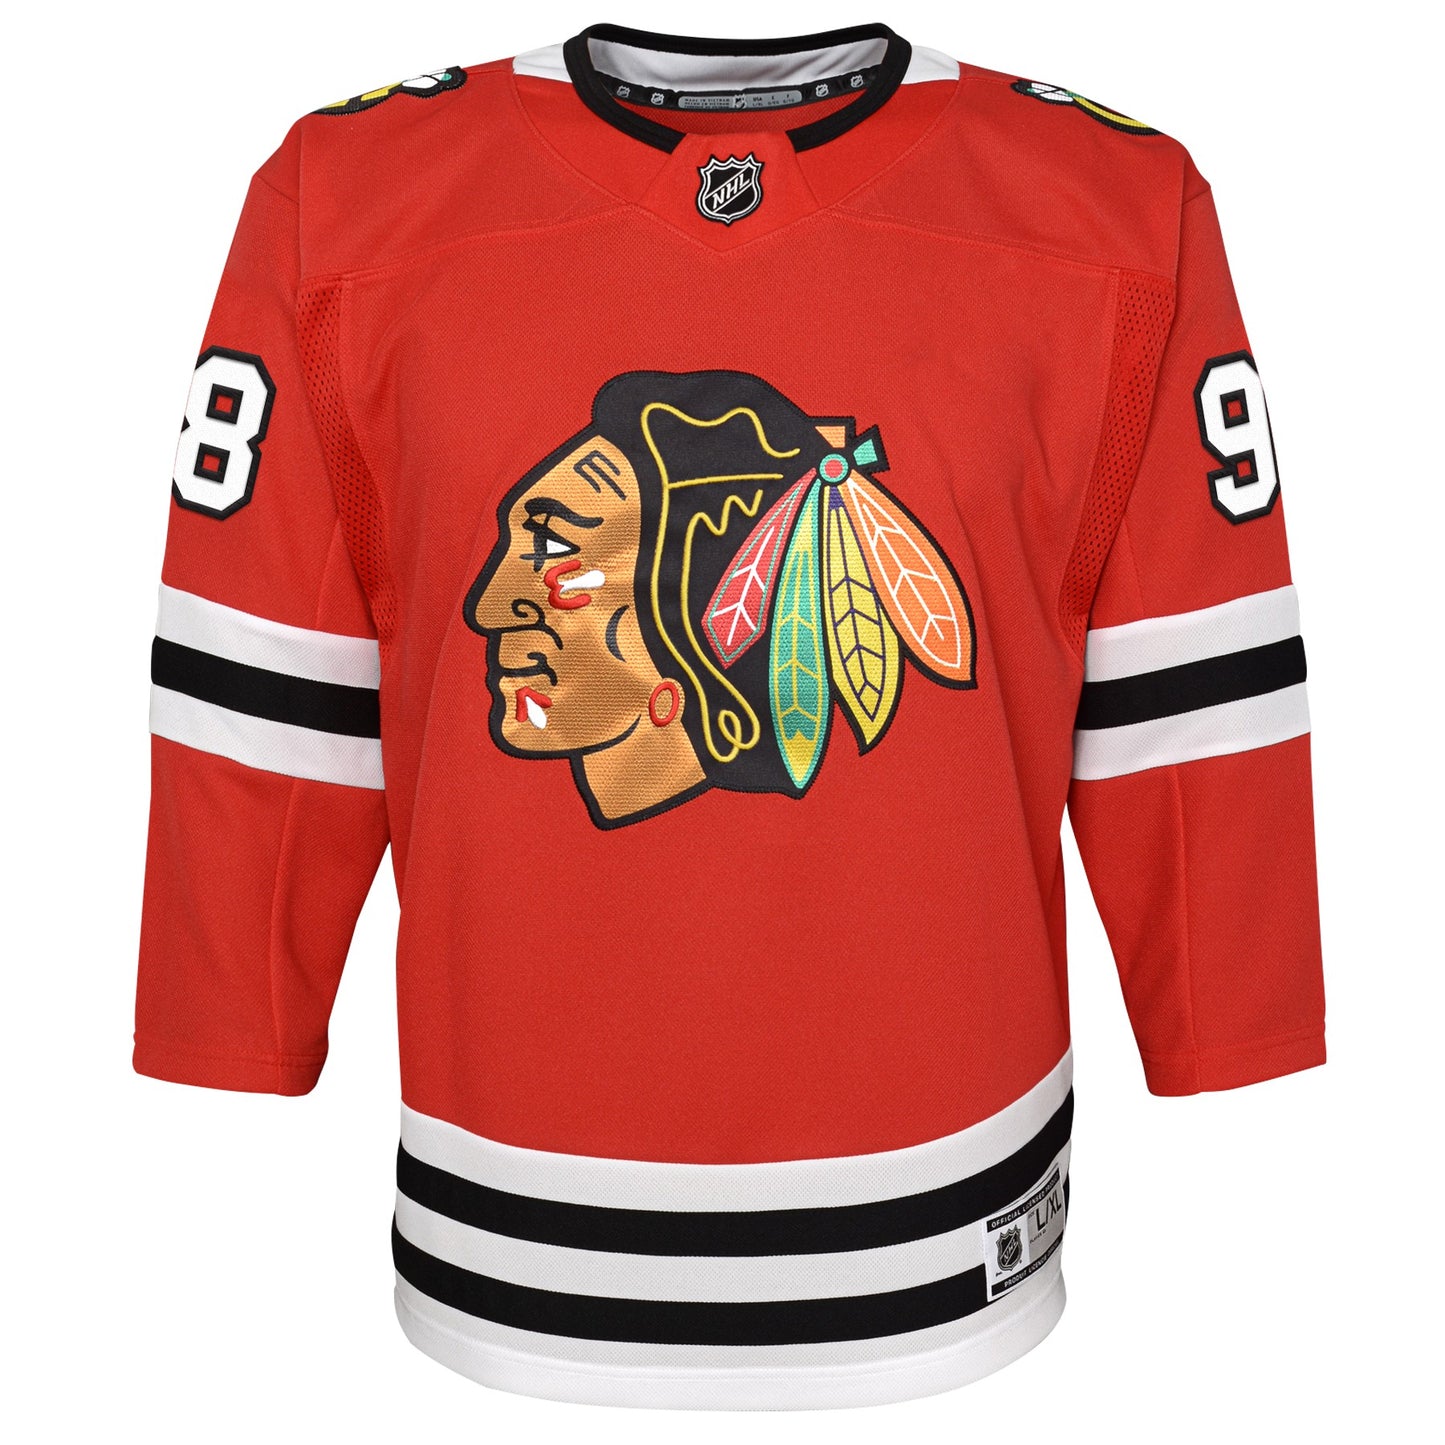 Youth Connor Bedard Chicago Blackhawks Red Home NHL Premier Jersey